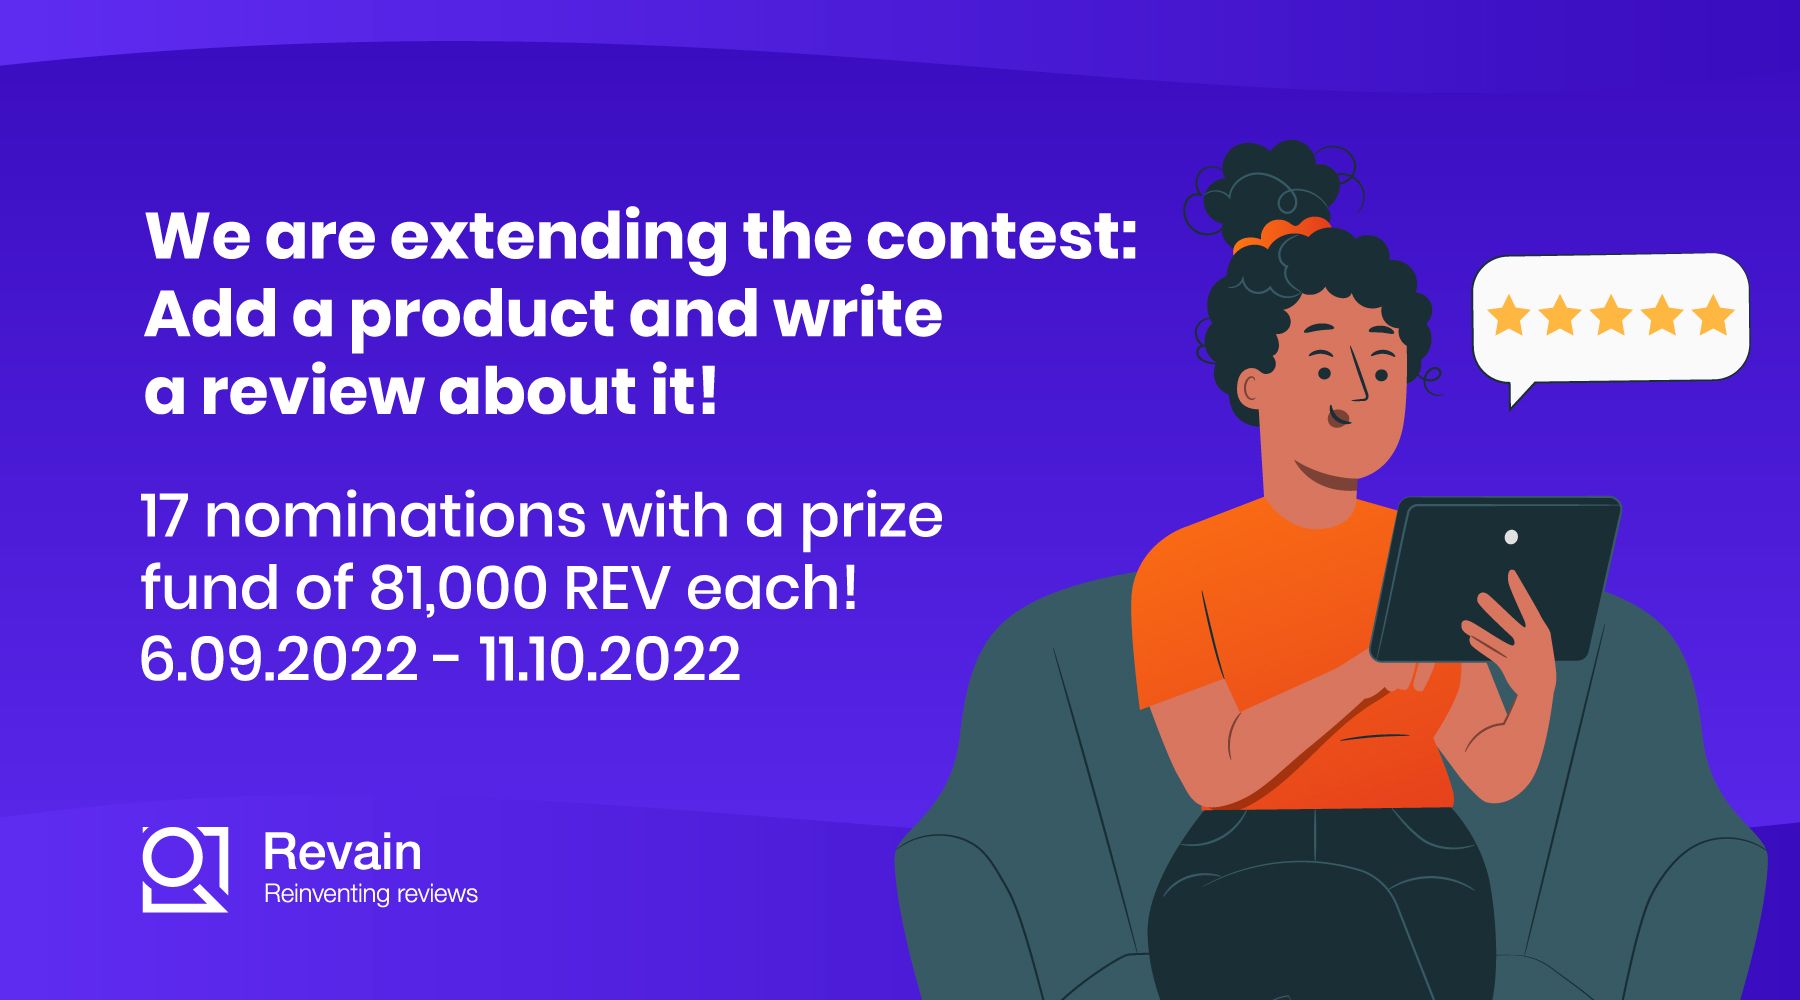 Article We are extending the contest: Add a product and write a review about it!